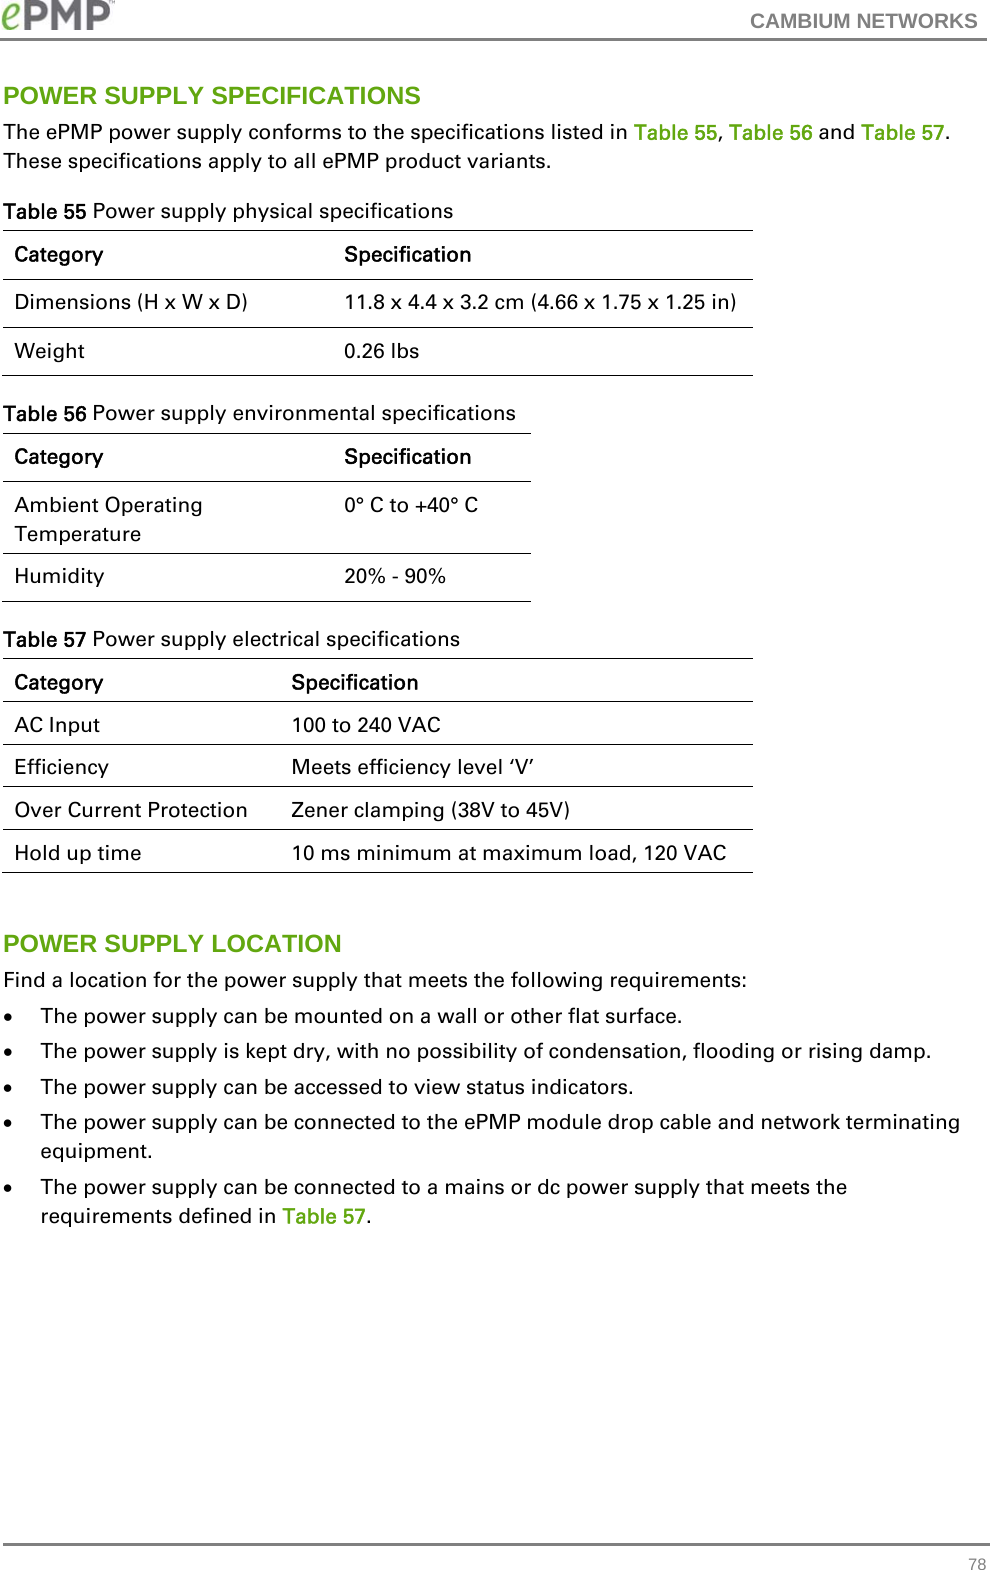 CAMBIUM NETWORKS   78POWER SUPPLY SPECIFICATIONS The ePMP power supply conforms to the specifications listed in Table 55, Table 56 and Table 57.  These specifications apply to all ePMP product variants. Table 55 Power supply physical specifications Category Specification Dimensions (H x W x D)  11.8 x 4.4 x 3.2 cm (4.66 x 1.75 x 1.25 in) Weight   0.26 lbs Table 56 Power supply environmental specifications Category Specification Ambient Operating Temperature  0° C to +40° C Humidity   20% - 90% Table 57 Power supply electrical specifications Category Specification AC Input  100 to 240 VAC Efficiency  Meets efficiency level ‘V’ Over Current Protection  Zener clamping (38V to 45V) Hold up time   10 ms minimum at maximum load, 120 VAC  POWER SUPPLY LOCATION Find a location for the power supply that meets the following requirements:  The power supply can be mounted on a wall or other flat surface.  The power supply is kept dry, with no possibility of condensation, flooding or rising damp.  The power supply can be accessed to view status indicators.  The power supply can be connected to the ePMP module drop cable and network terminating equipment.  The power supply can be connected to a mains or dc power supply that meets the requirements defined in Table 57.        